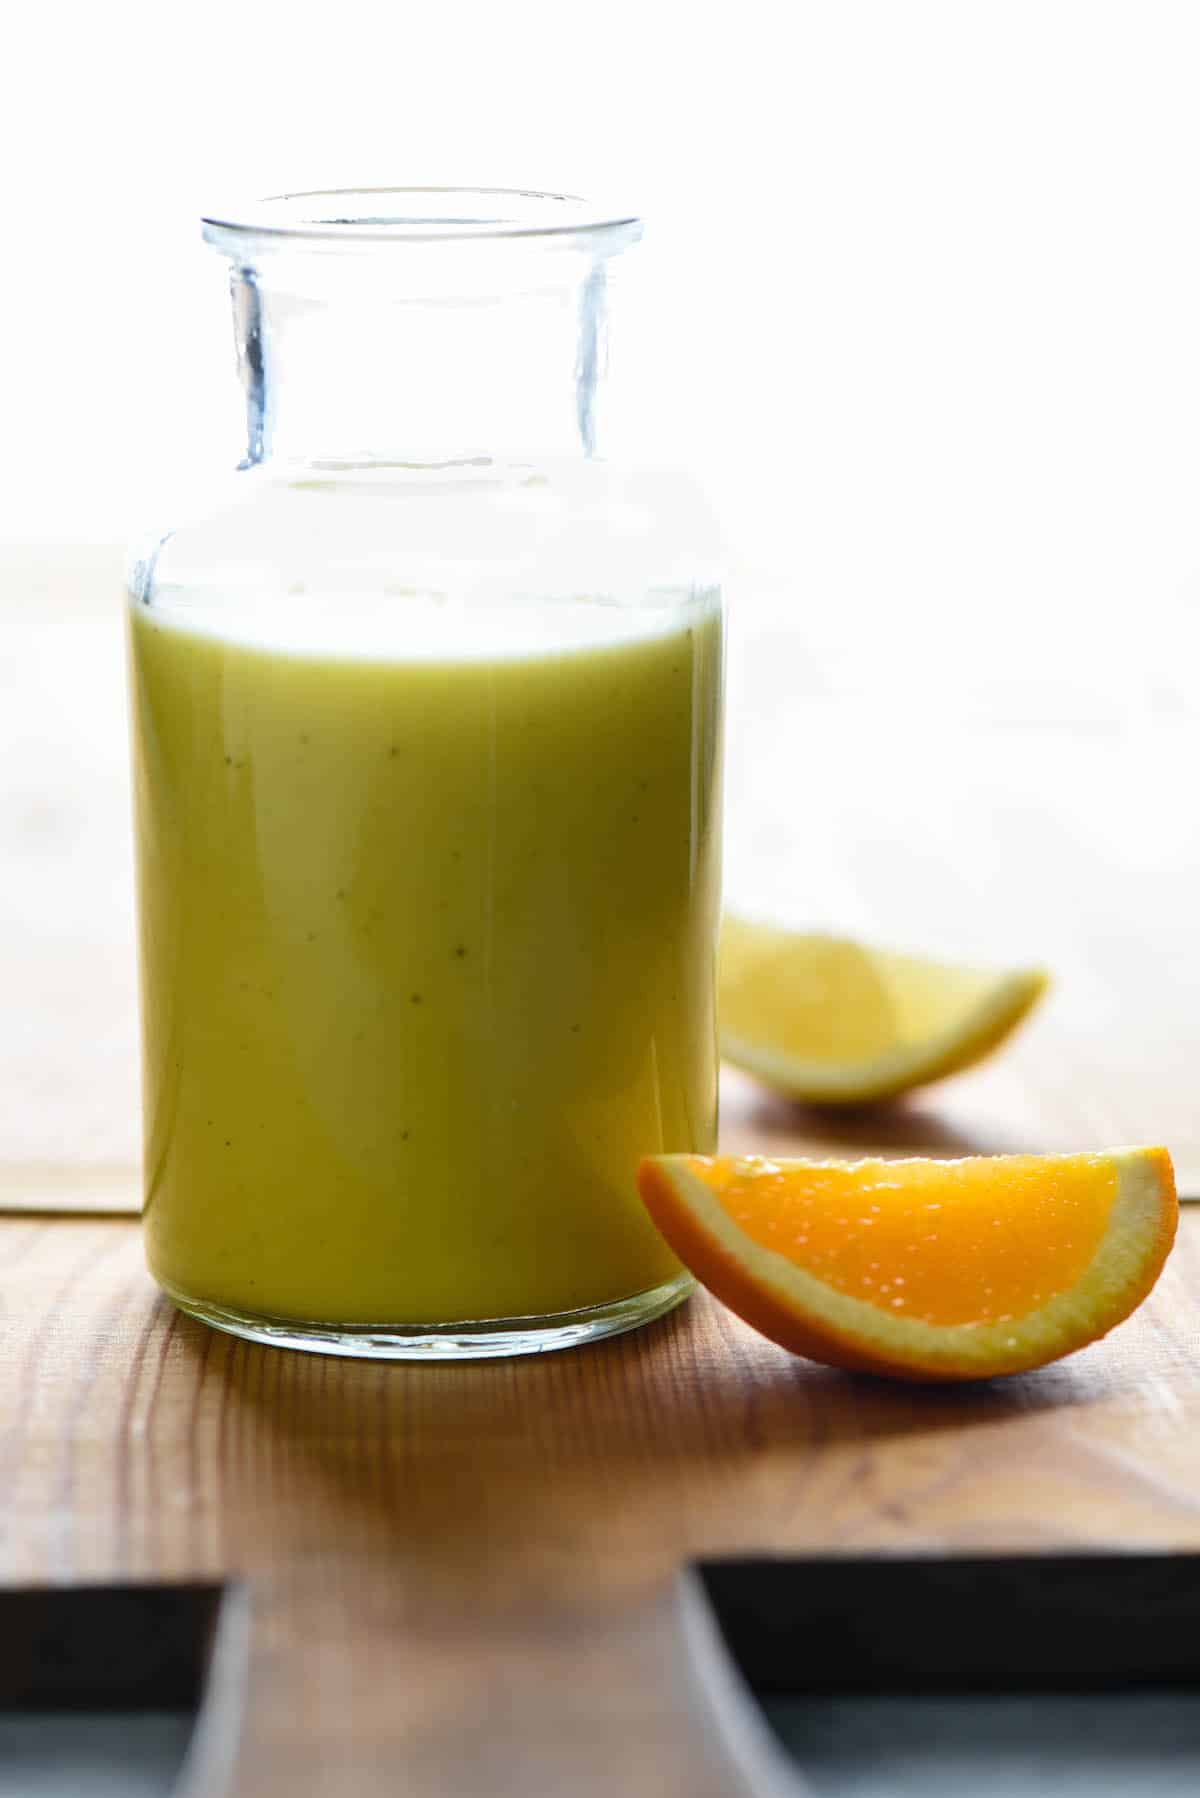 A small glass carafe filled with yellow-hued citrus vinaigrette on a wooden cutting board with orange and lemon wedges nearby.